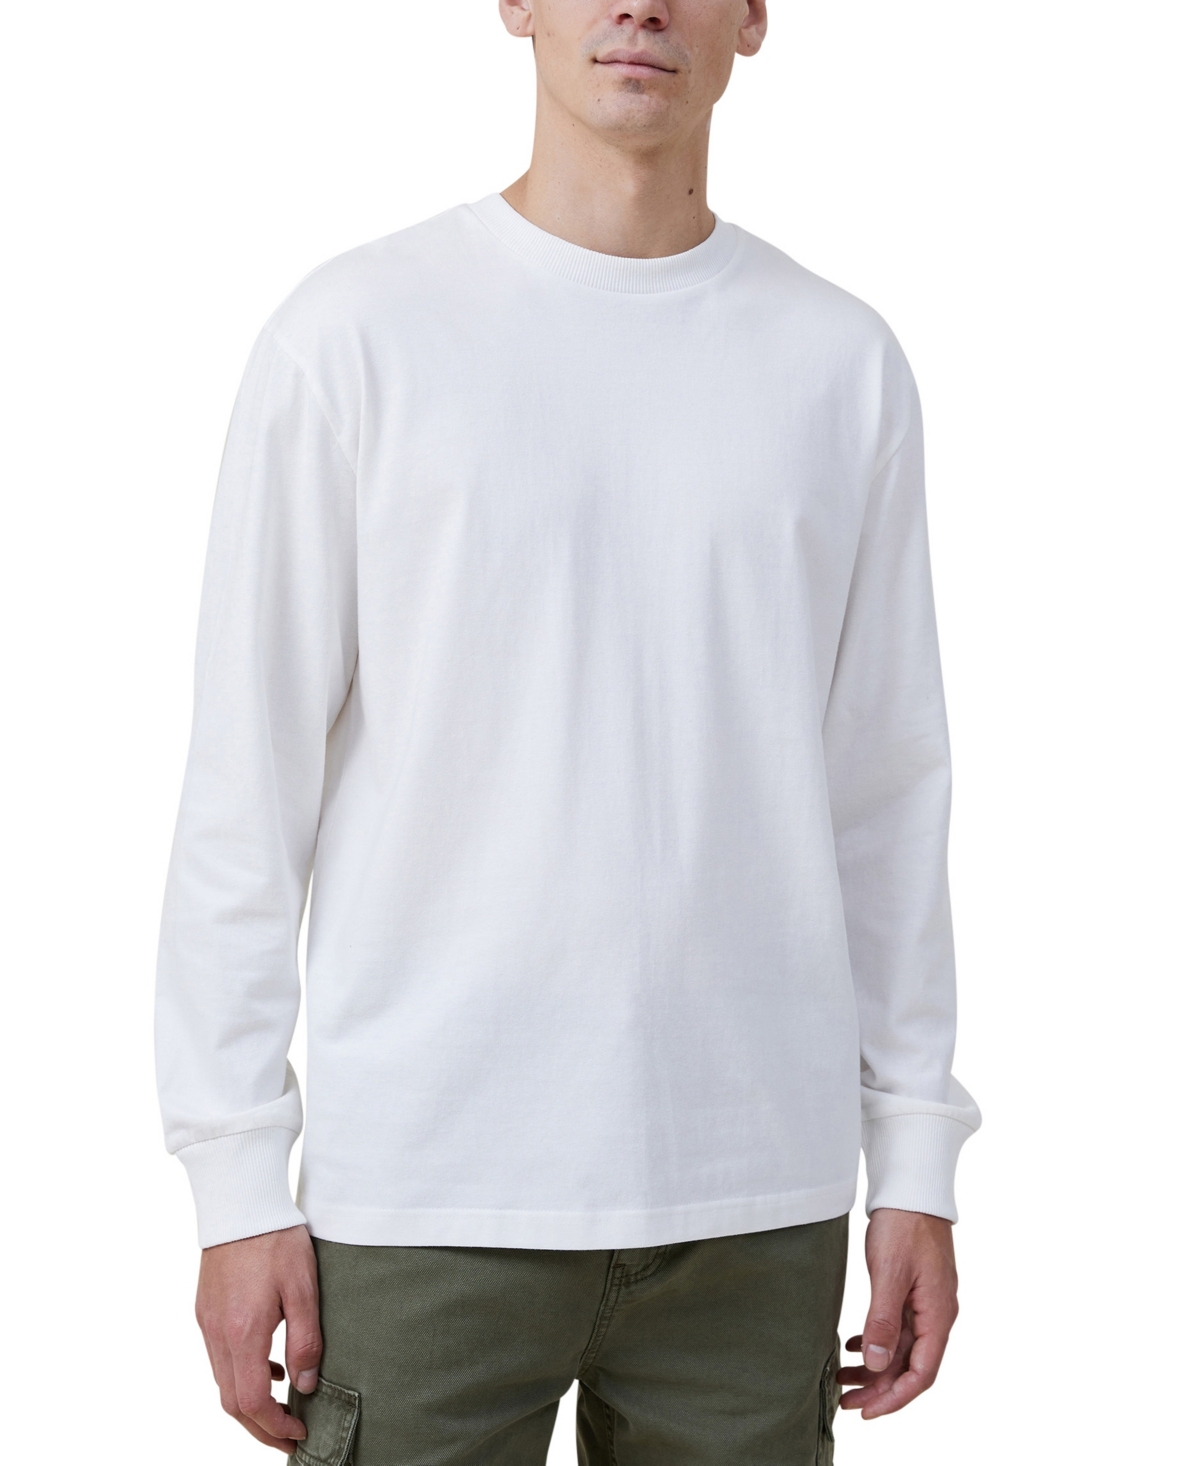 COTTON ON MEN'S LOOSE FIT LONG SLEEVE T-SHIRT